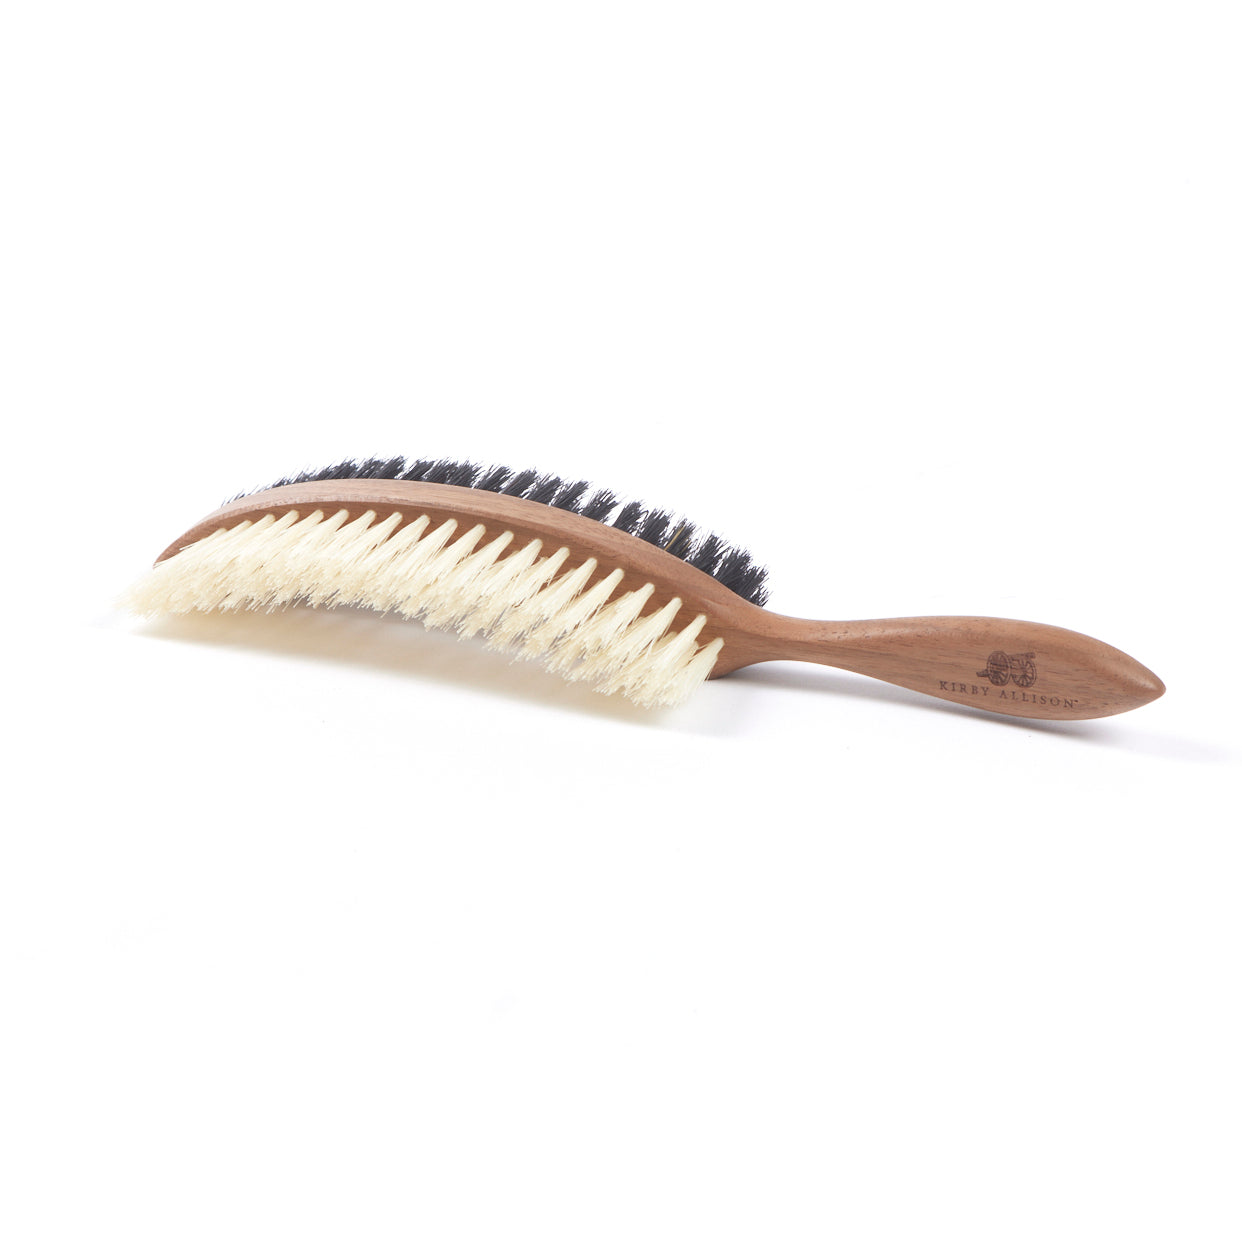 Kirby Allison Double-Sided Hat Brush